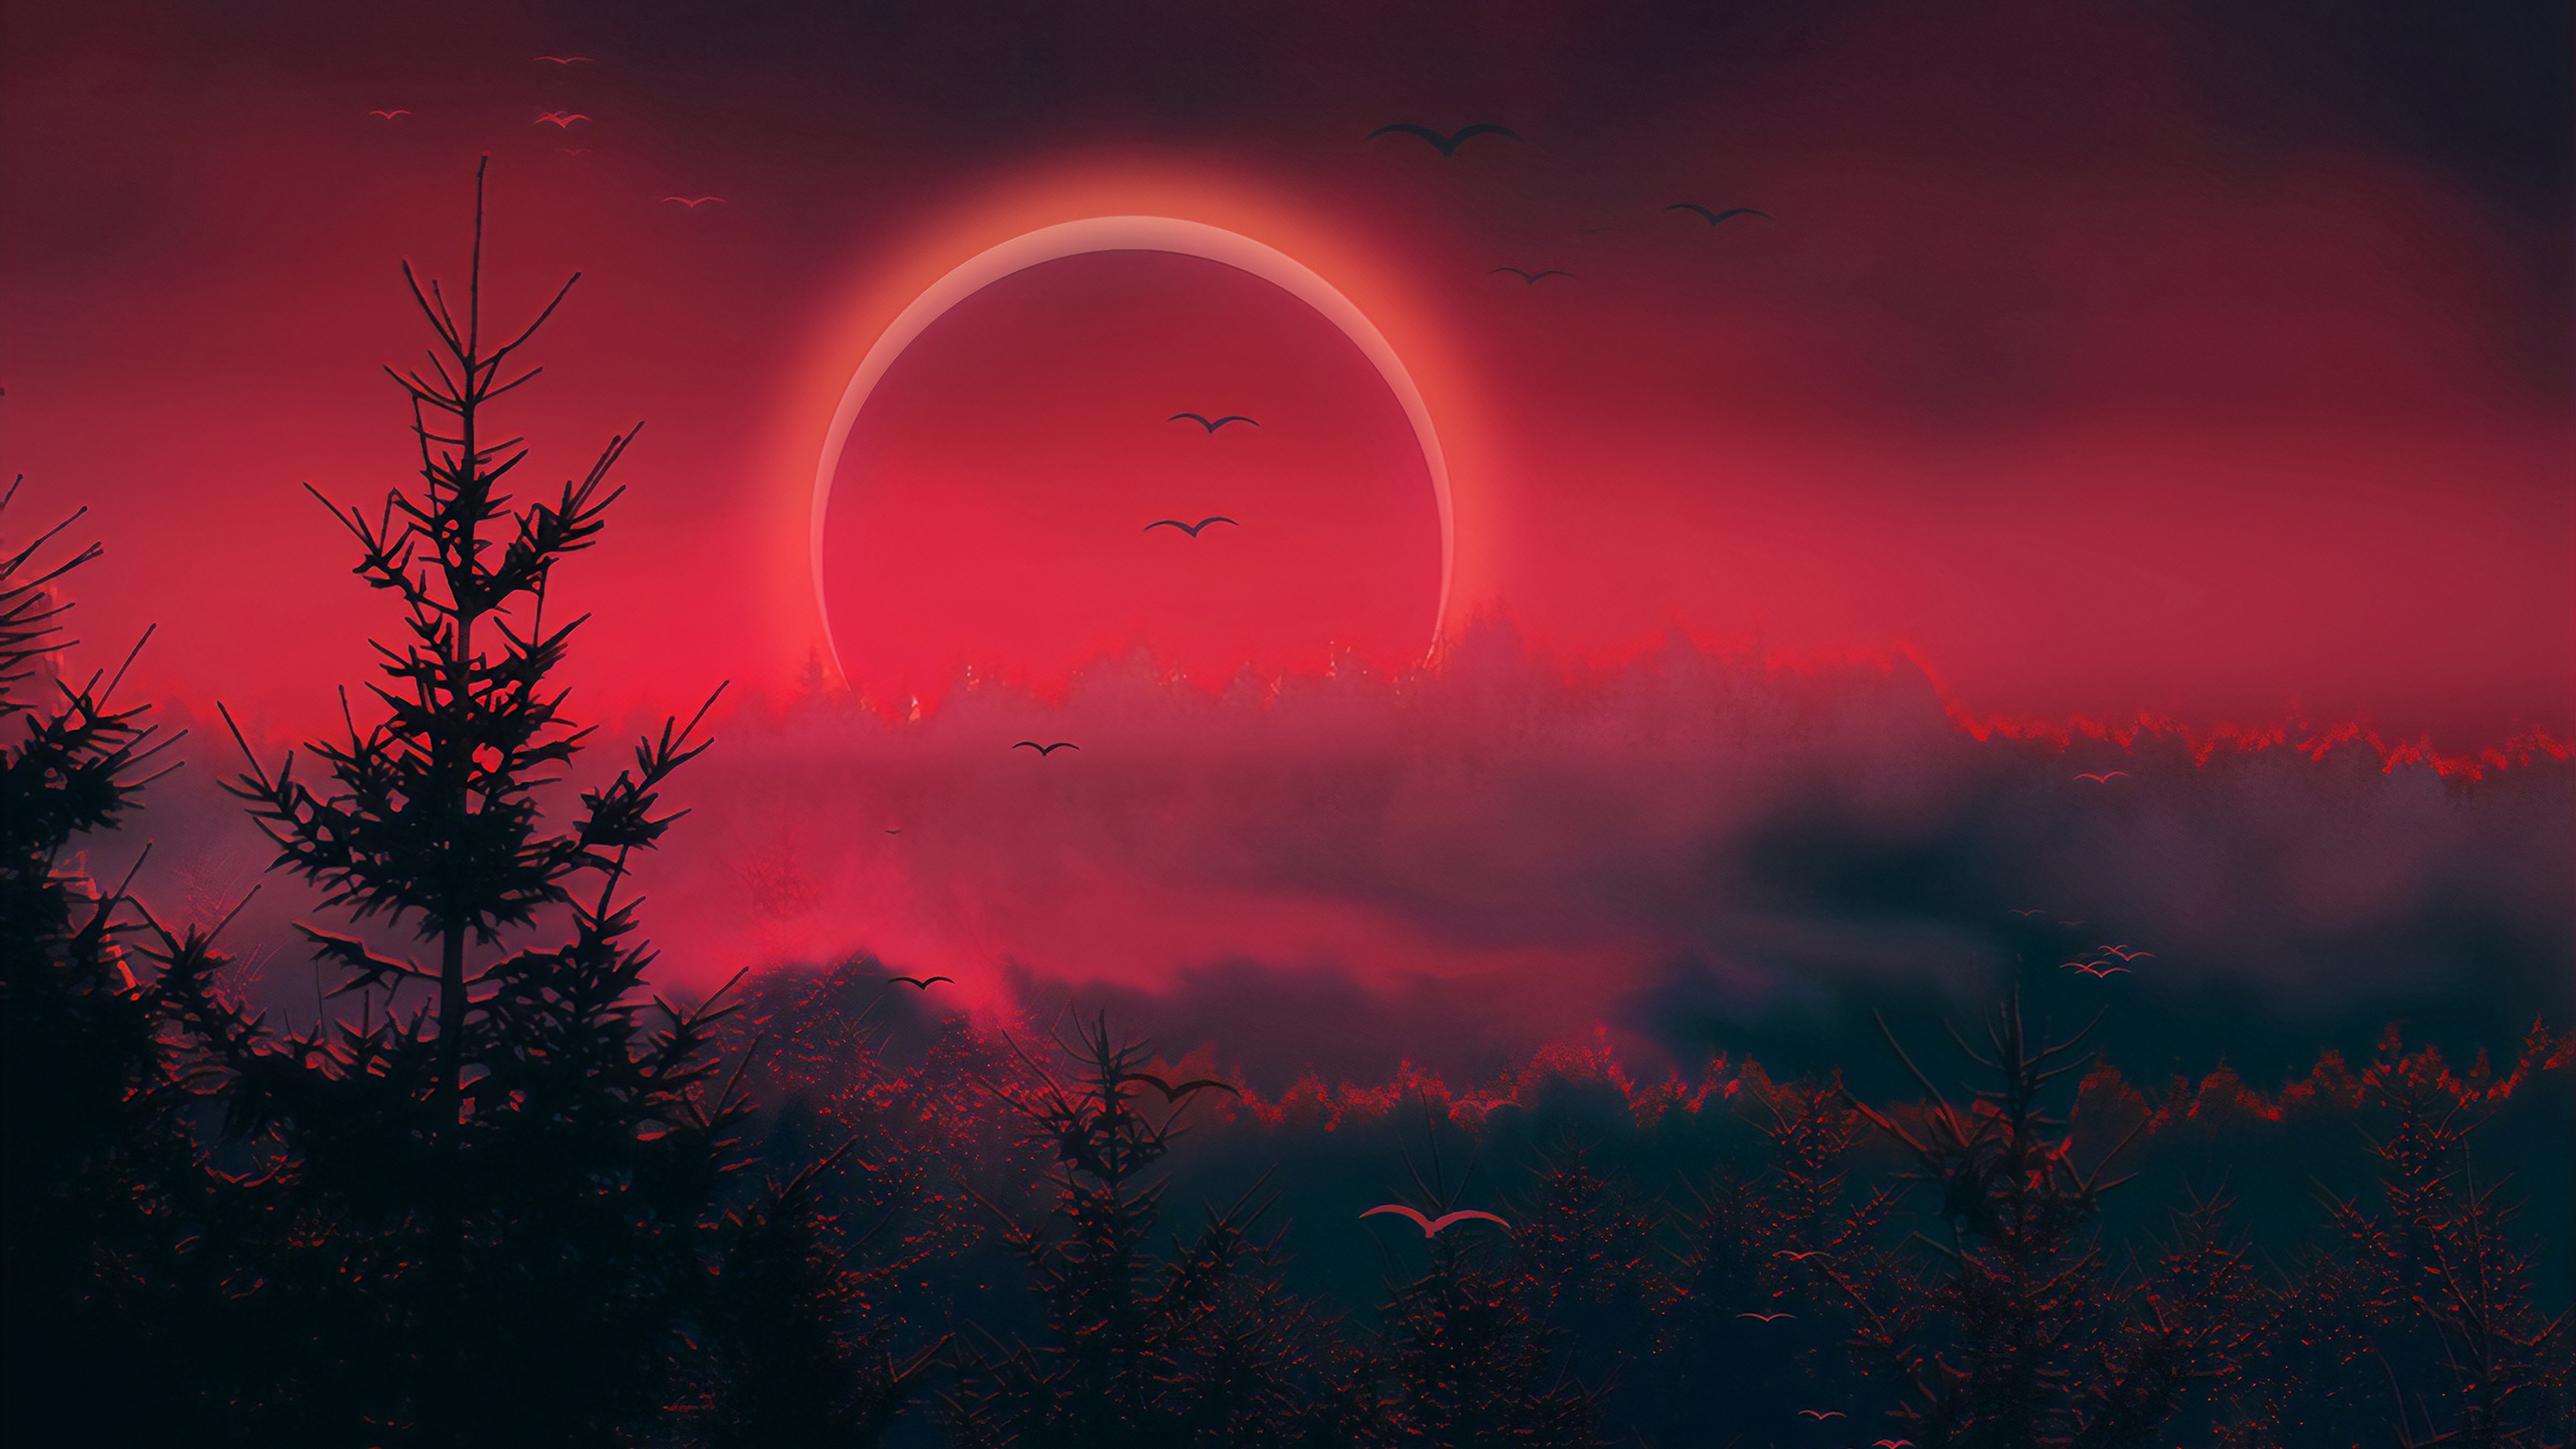  Solar Eclipse HD Wallpapers Space Nature Wallpaper Full Free Download